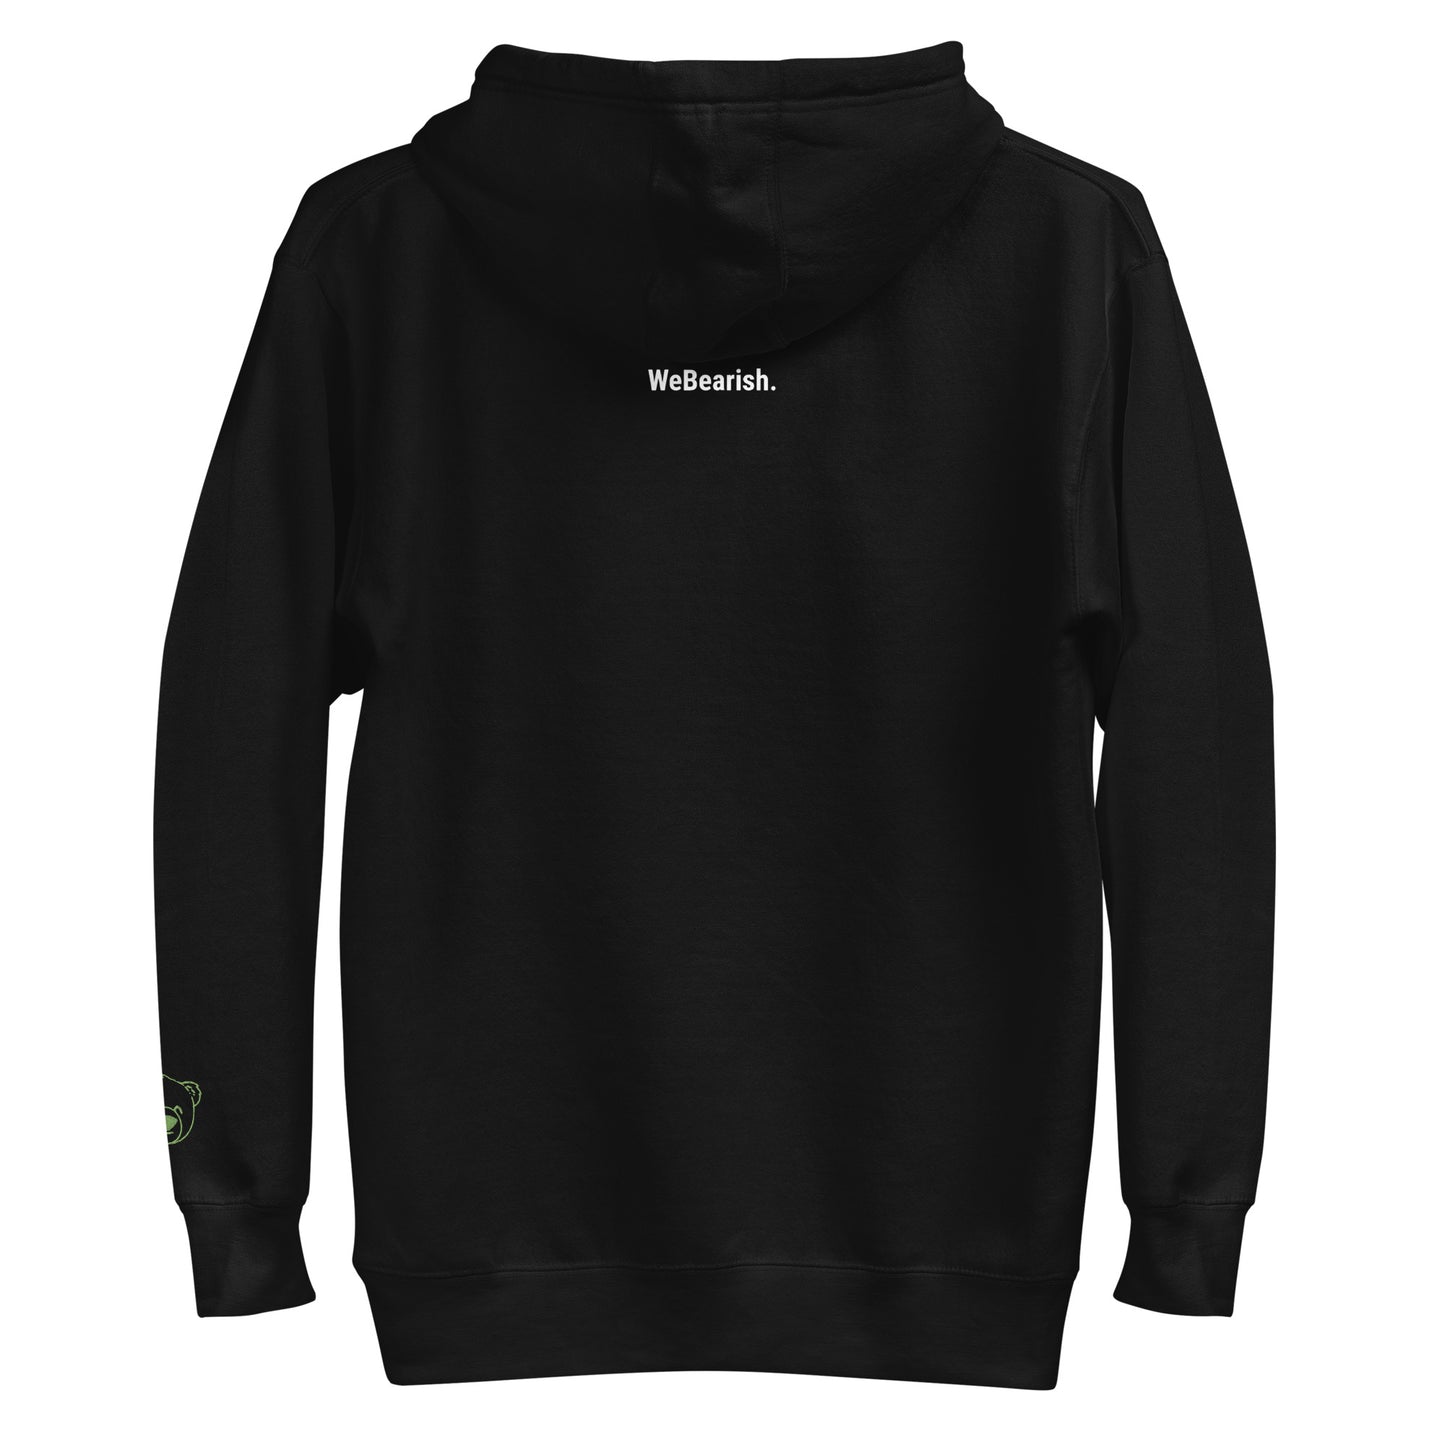 Autism Acceptance Embroidered Hoodie (Black)